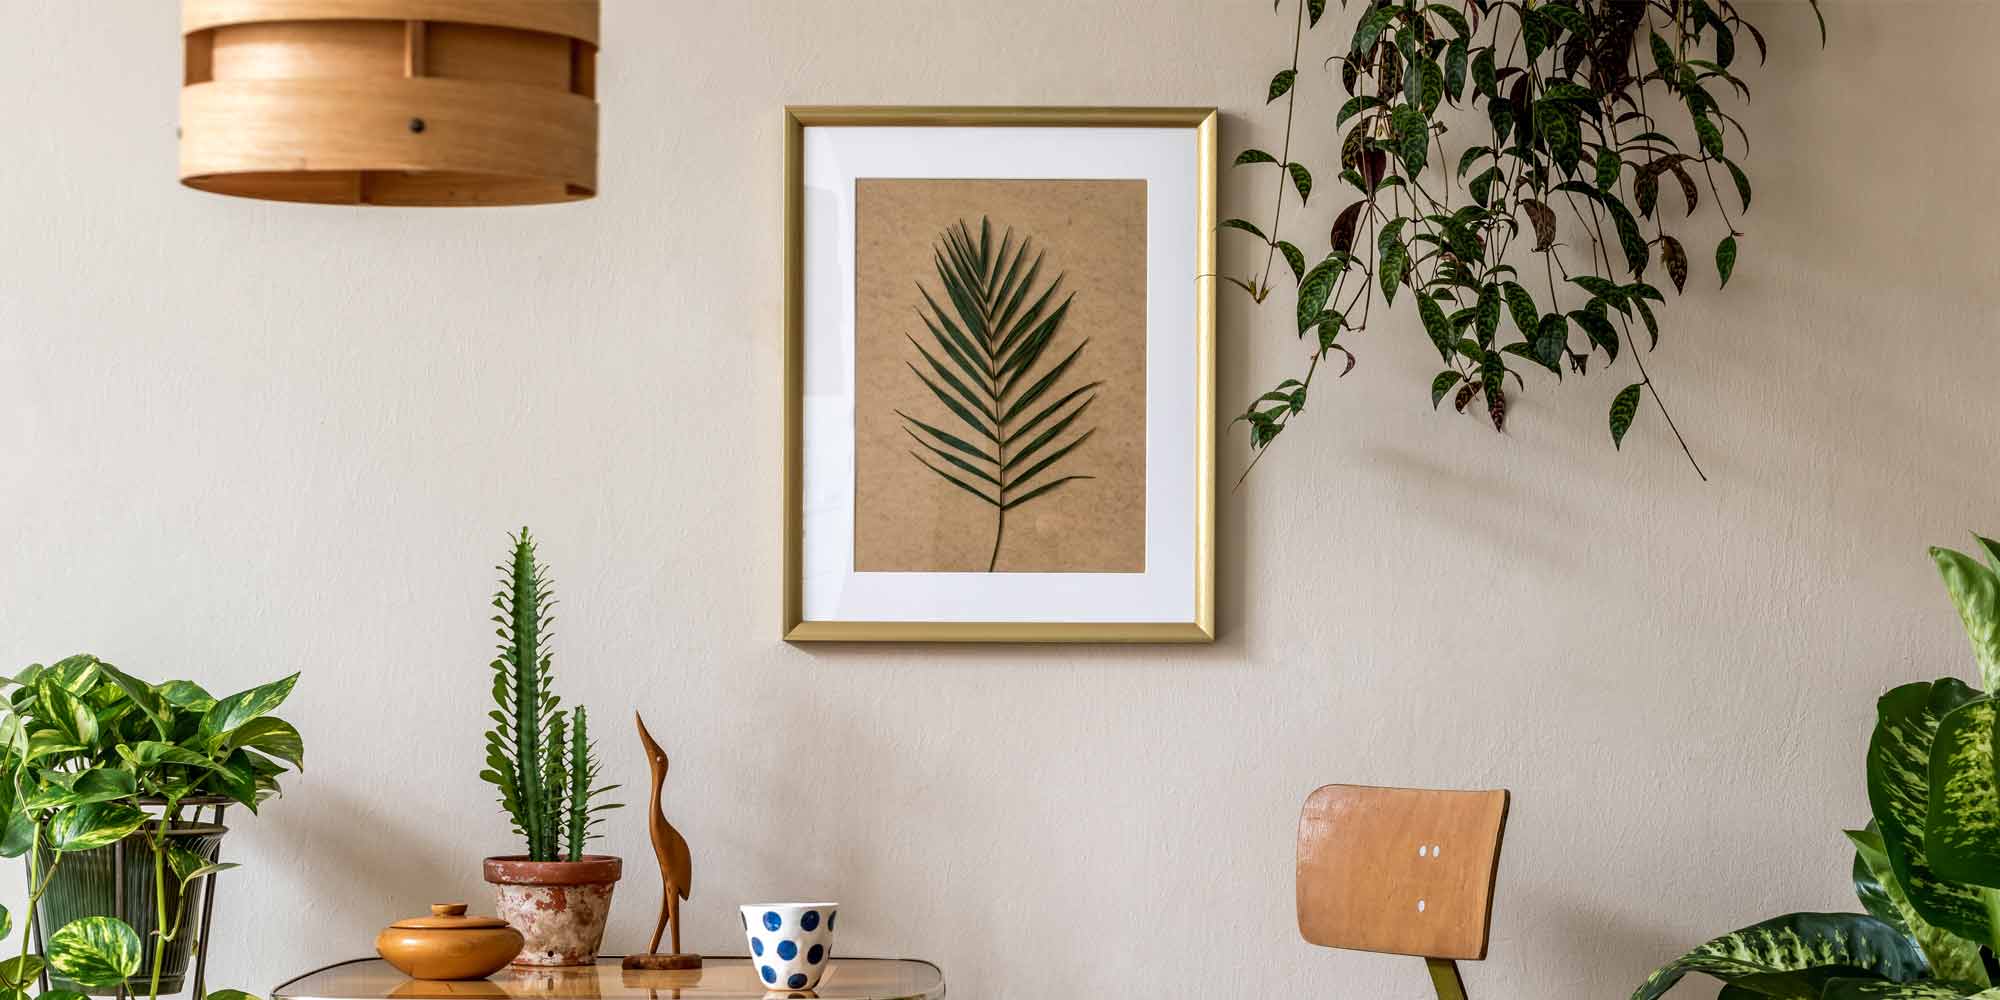 How To Hang Wall Art in an Apartment